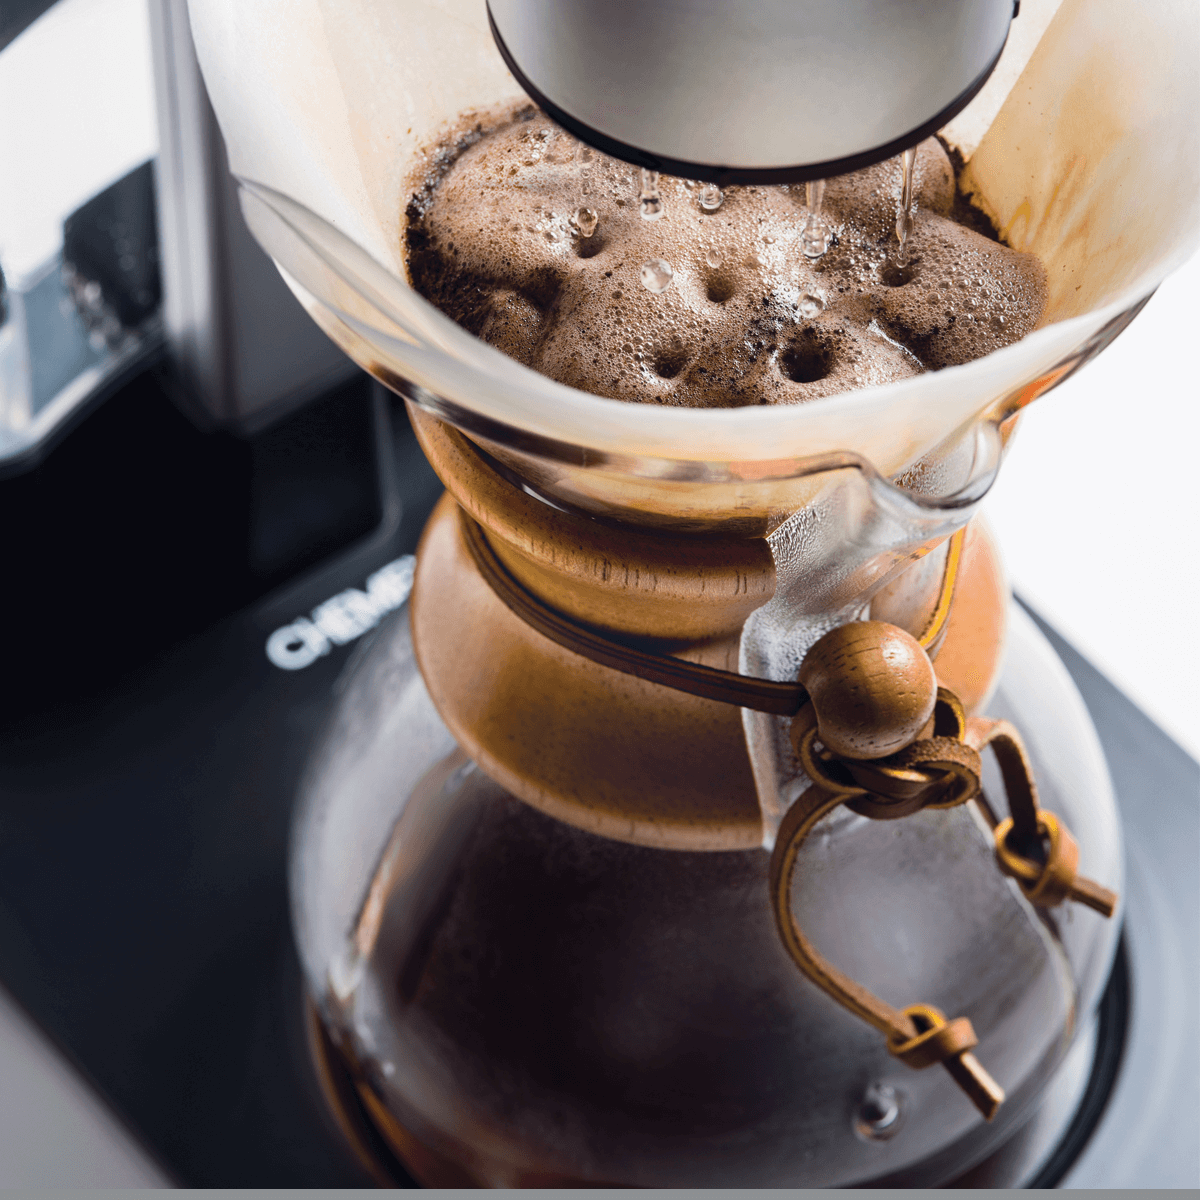 https://store.chemexcoffeemaker.com/media/catalog/product/c/h/chemex-ottomatic-in-use_1.png